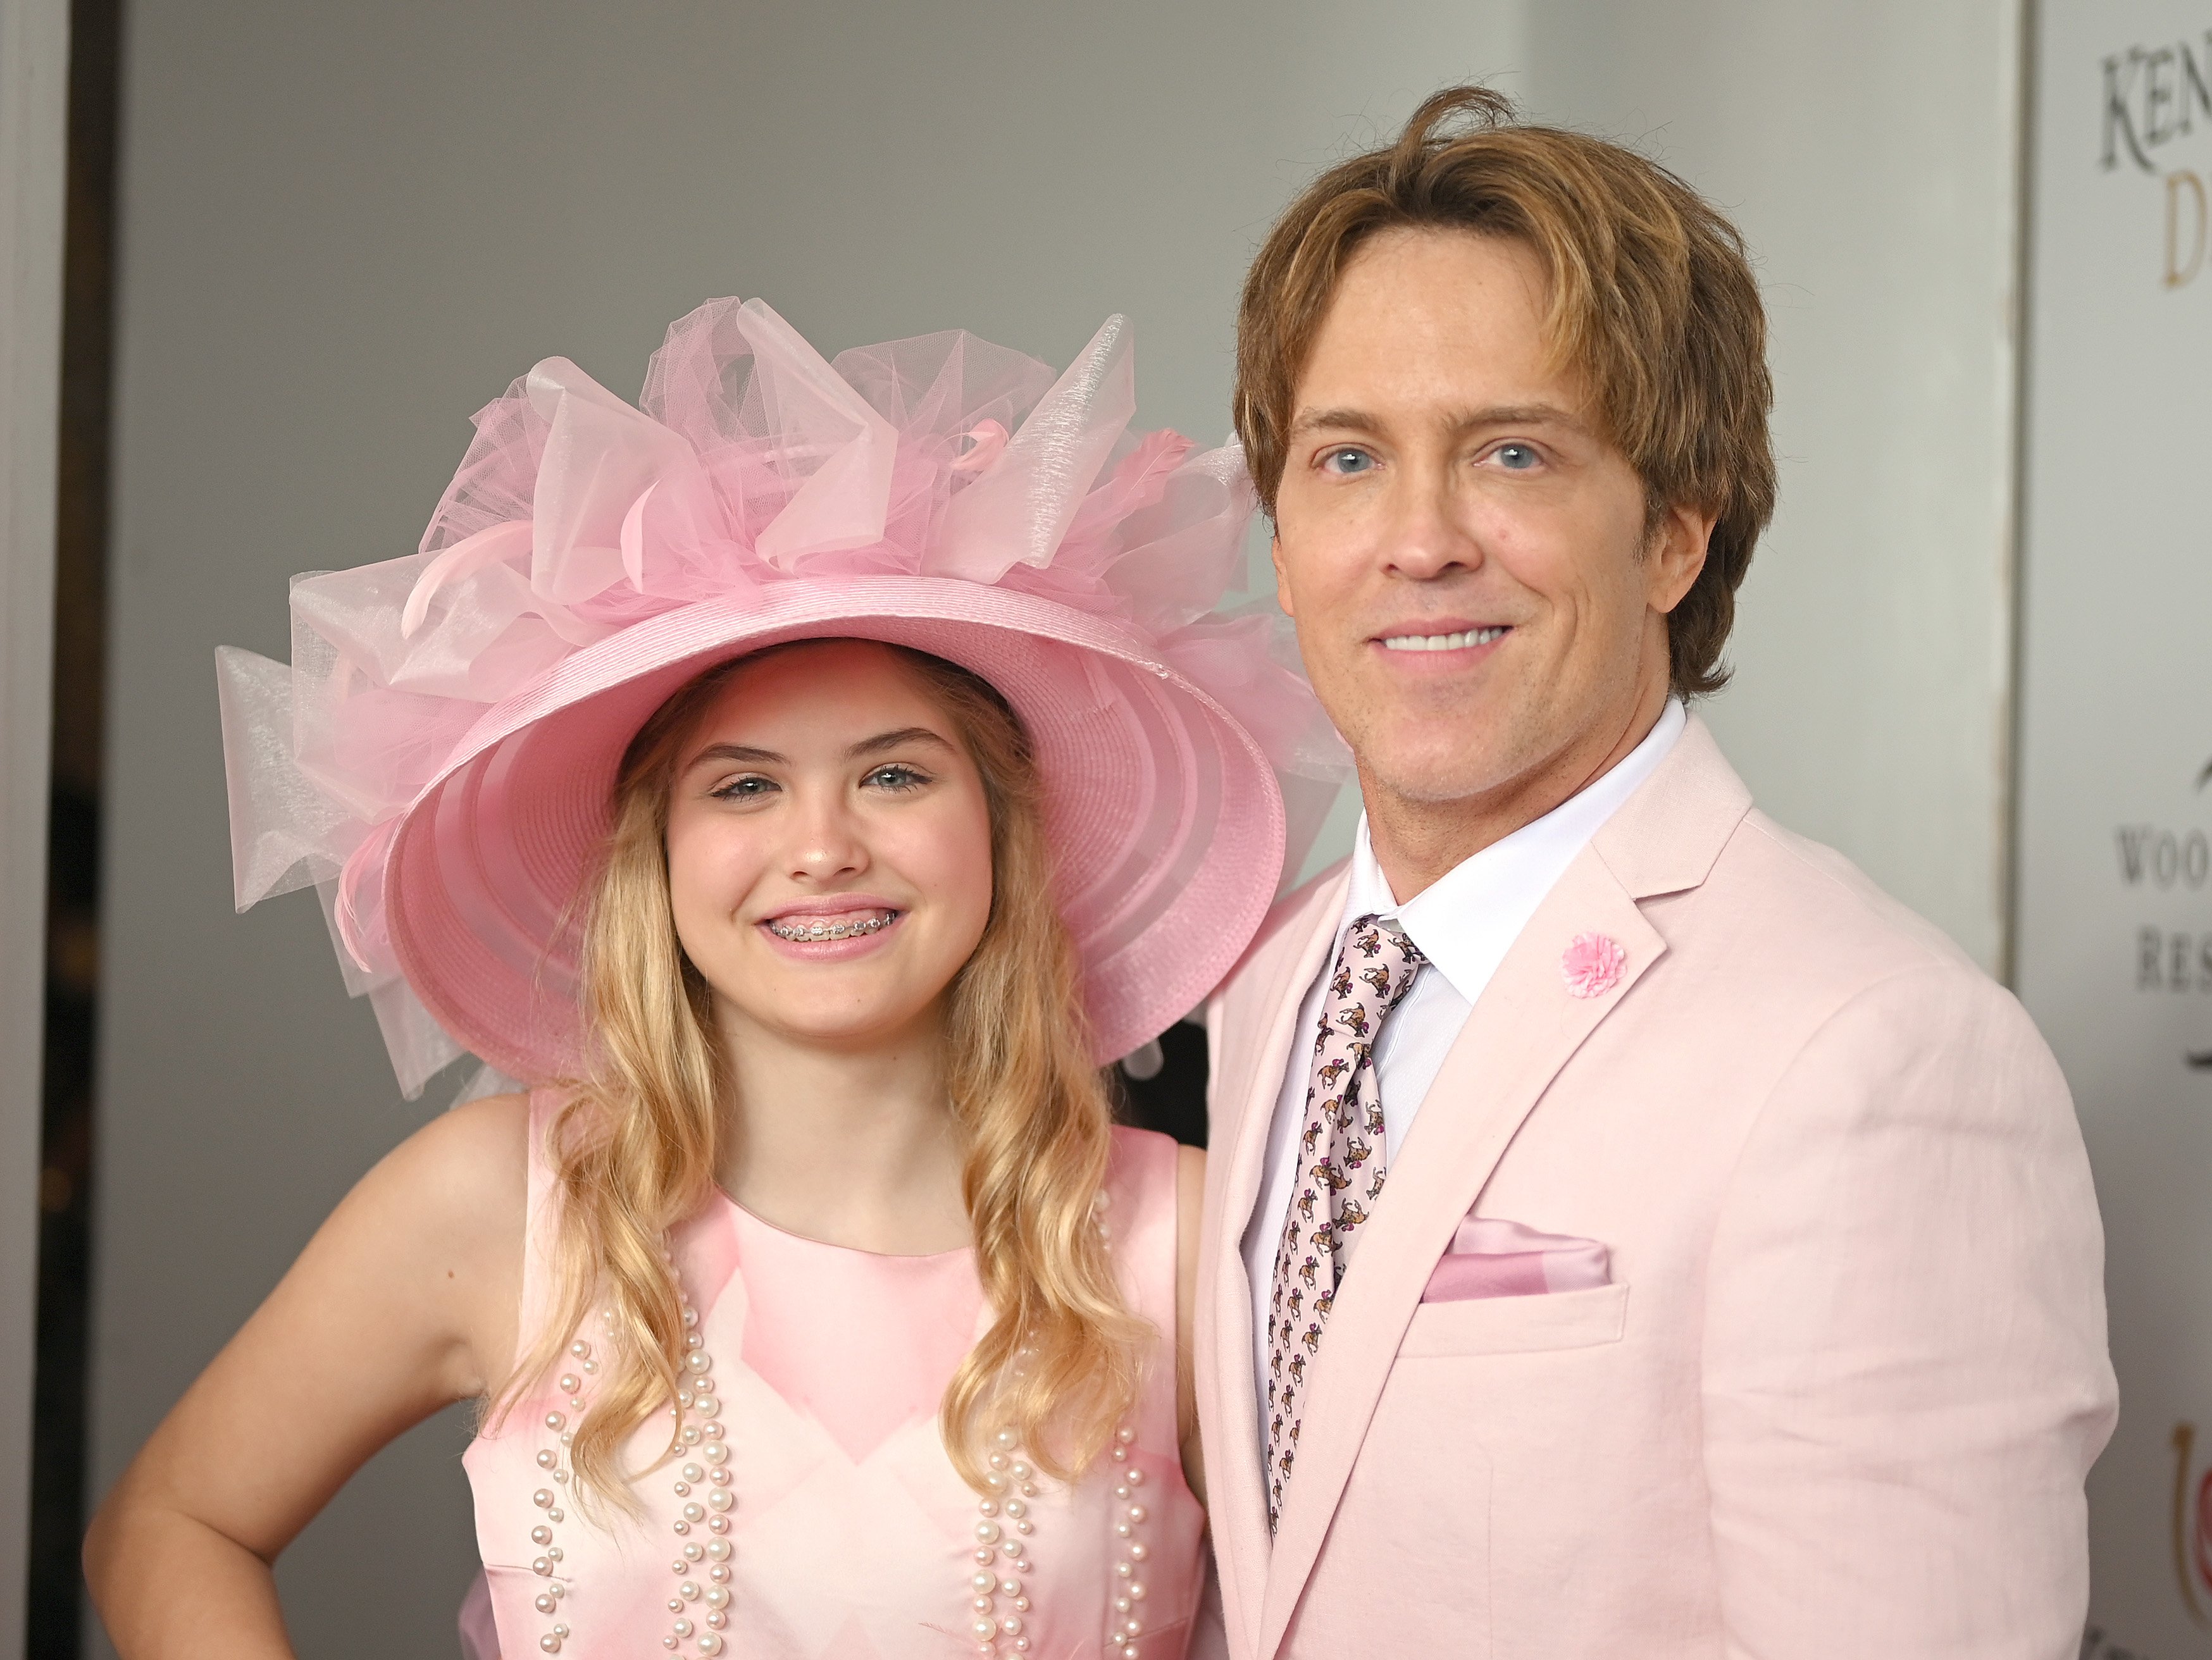 Dannielynn and Larry Birkhead at the 145th Kentucky Derby at Churchill Downs on May 4, 2019, in Louisville, Kentucky | Source: Getty Images